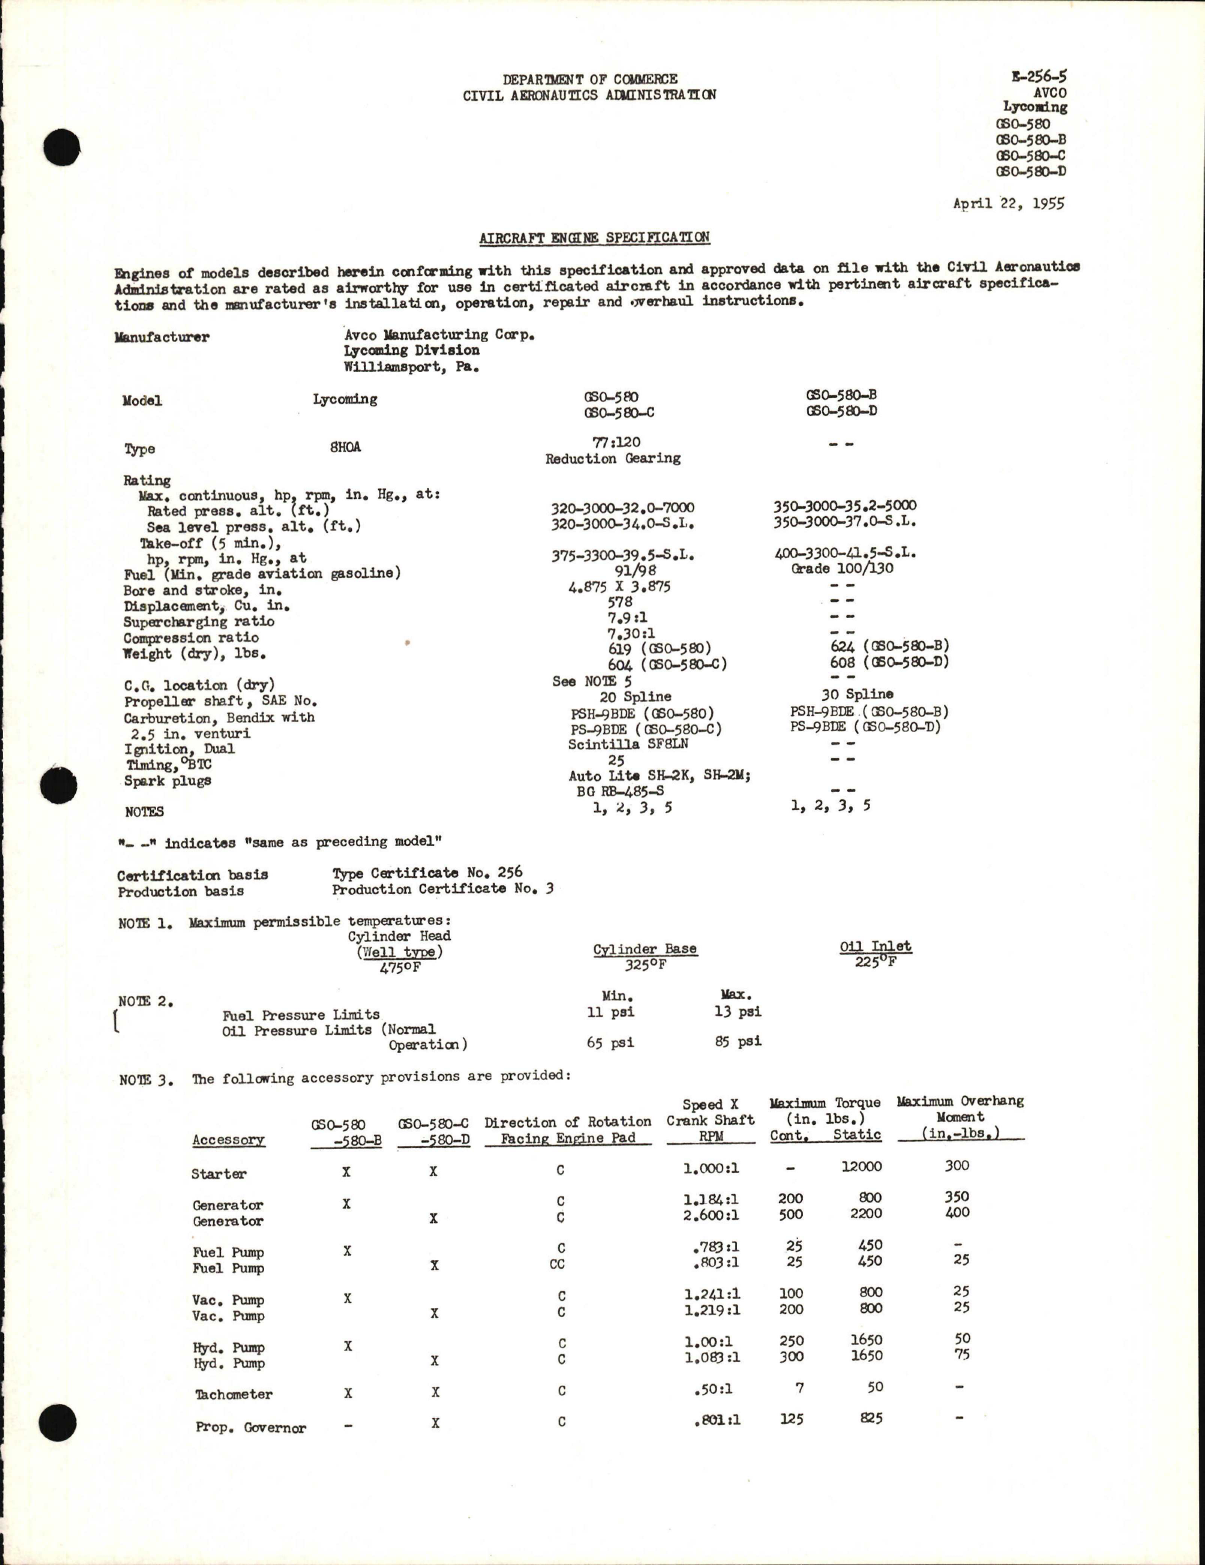 Sample page 1 from AirCorps Library document: GS0-580